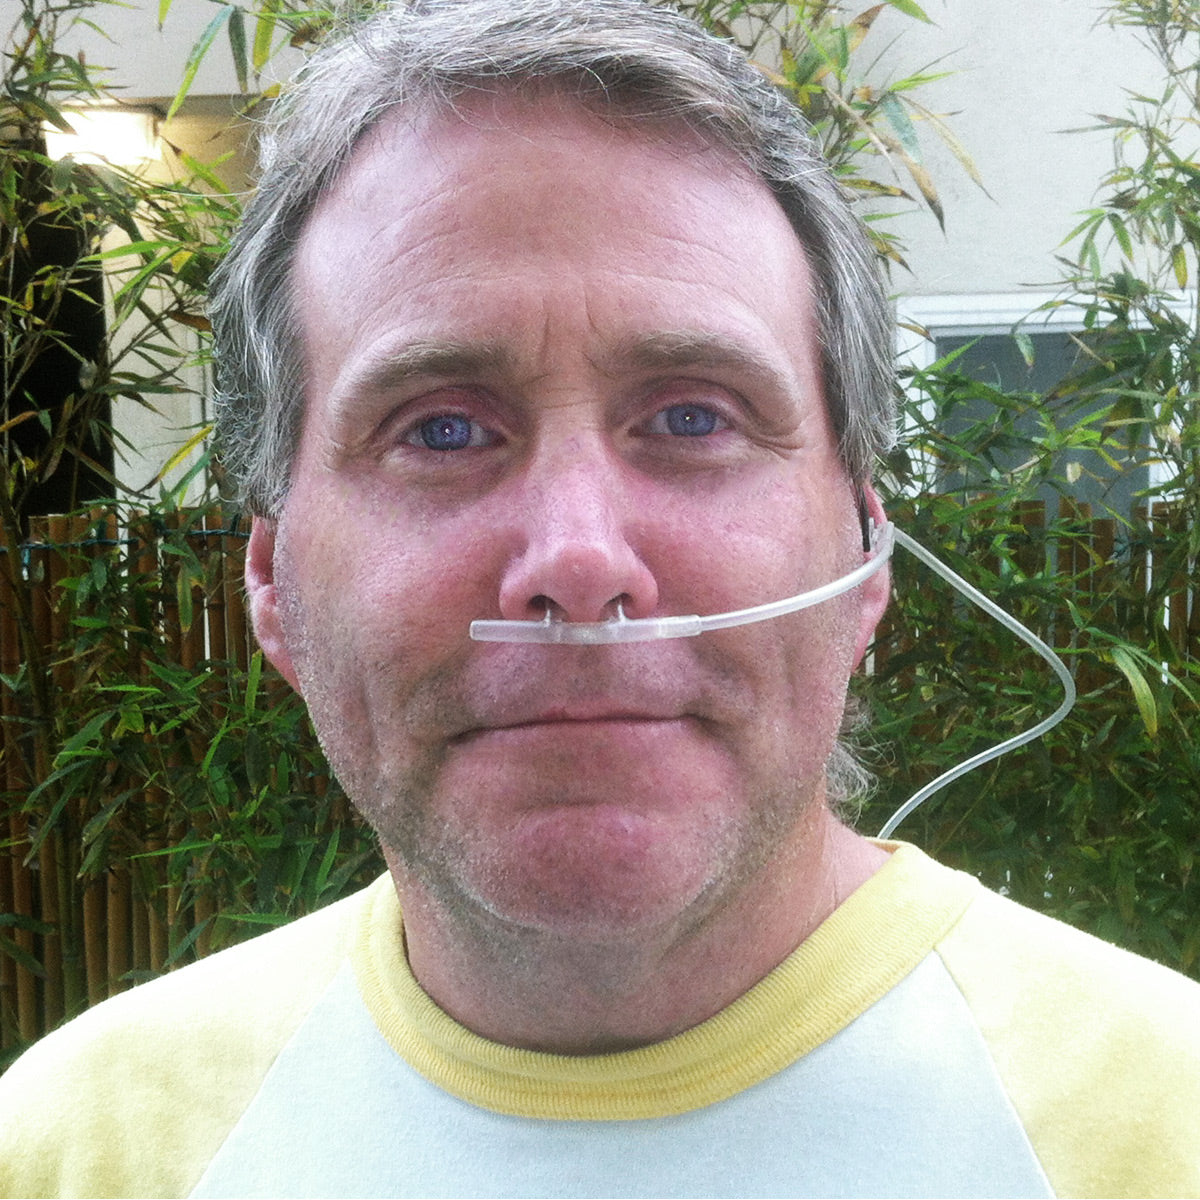 OxyBreather Single Sided Nasal Cannula with 7 Foot Oxygen Supply Tubing